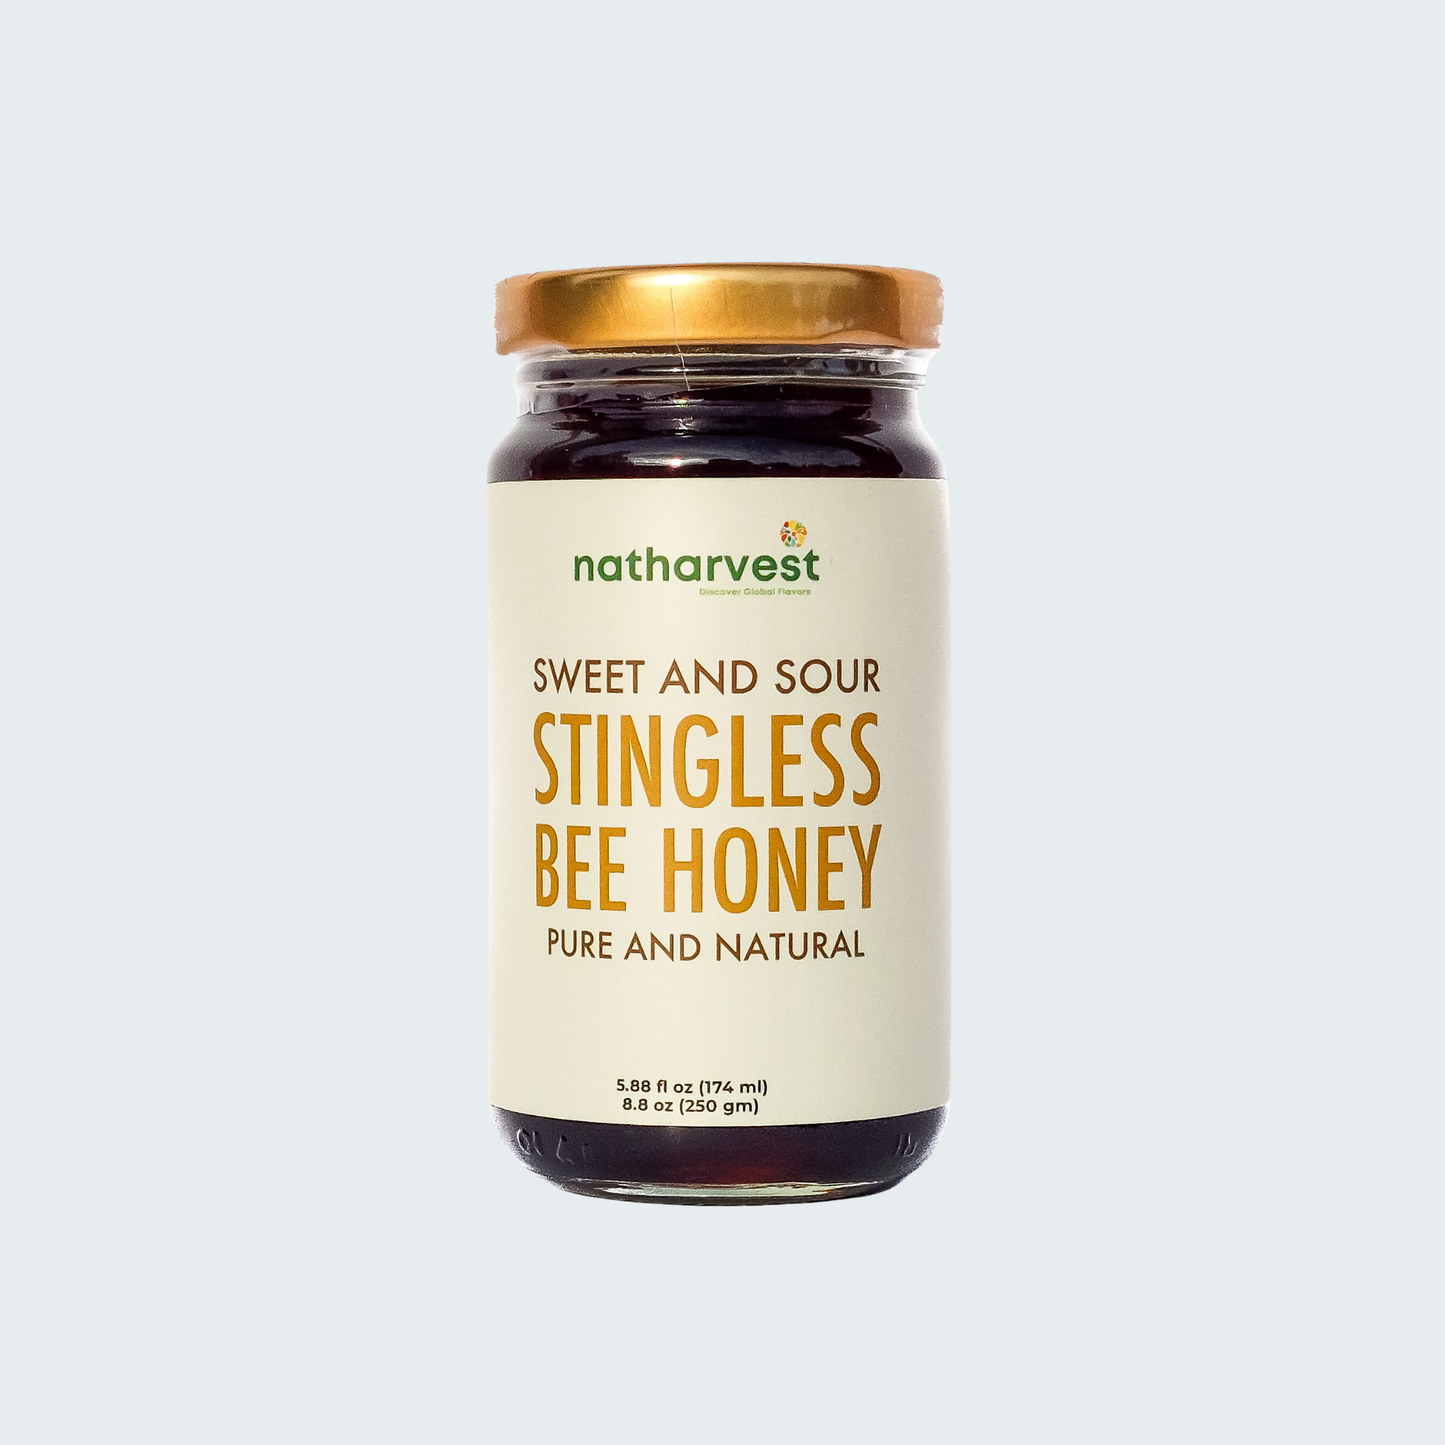 Natharvest Sweet and Sour Stingless Bee Honey, 8.8 oz (250 grams), a case of 30